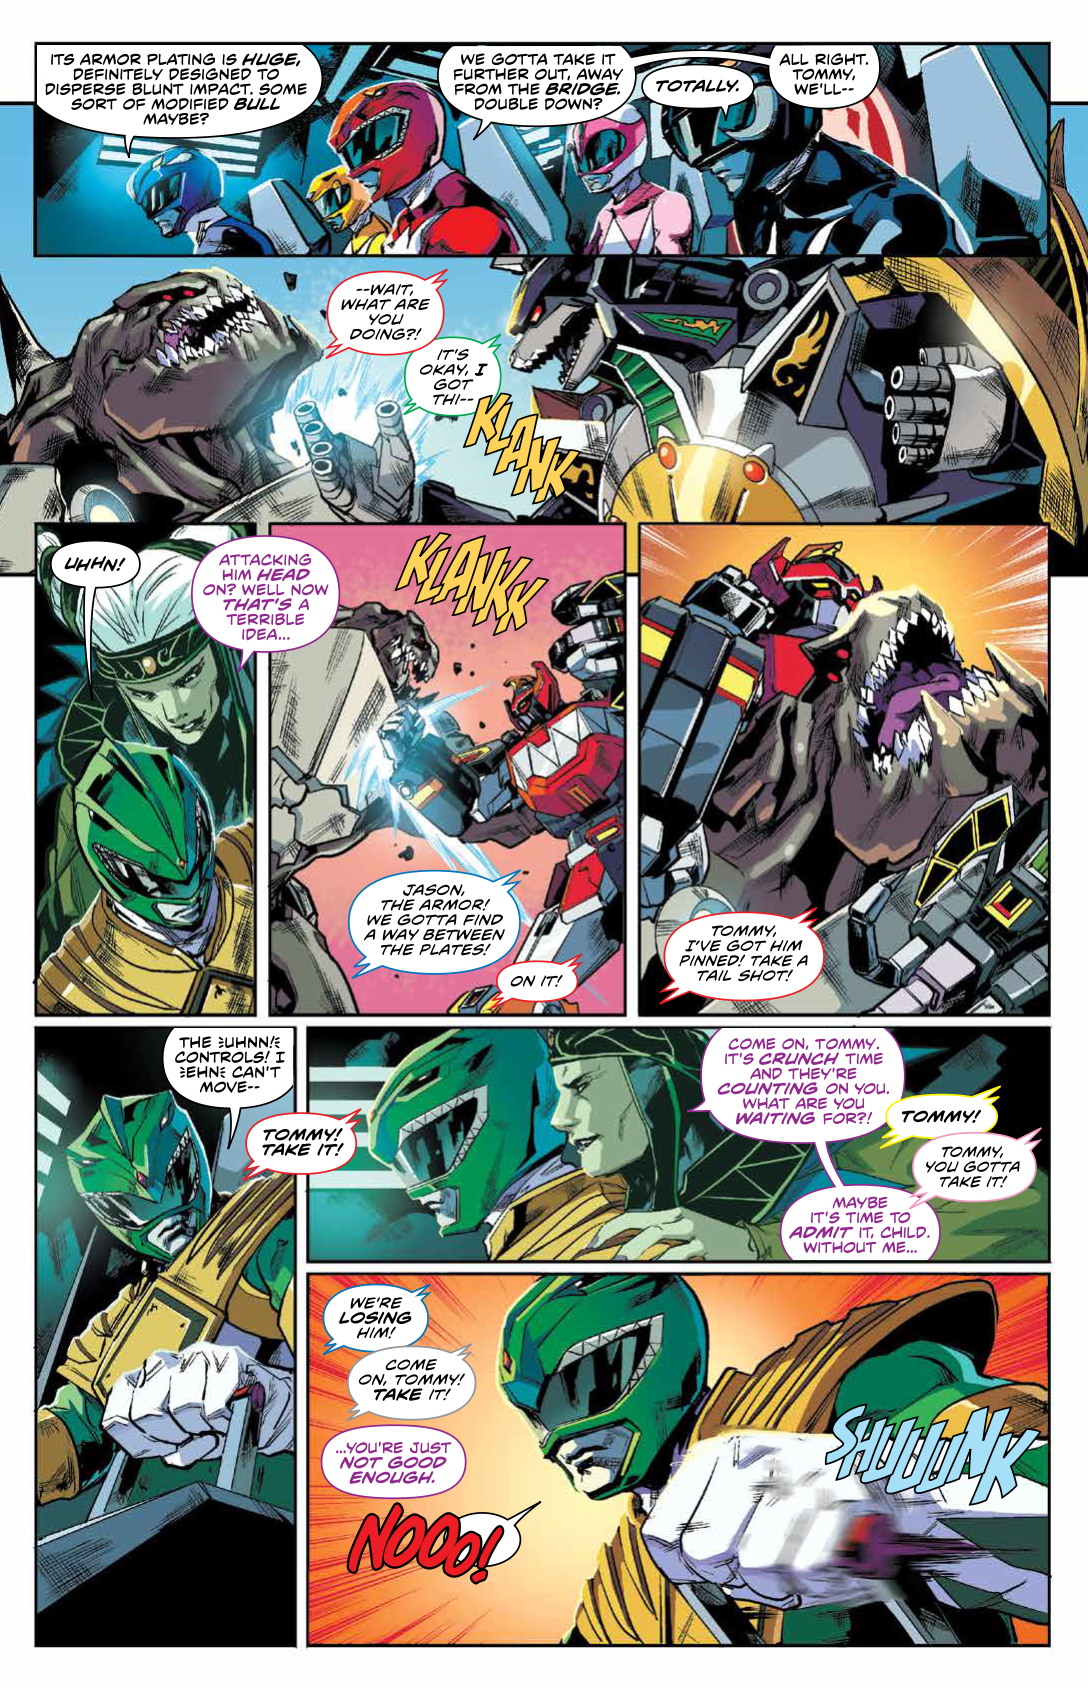 MMPR_Deluxe_Year1_HC_PRESS_18